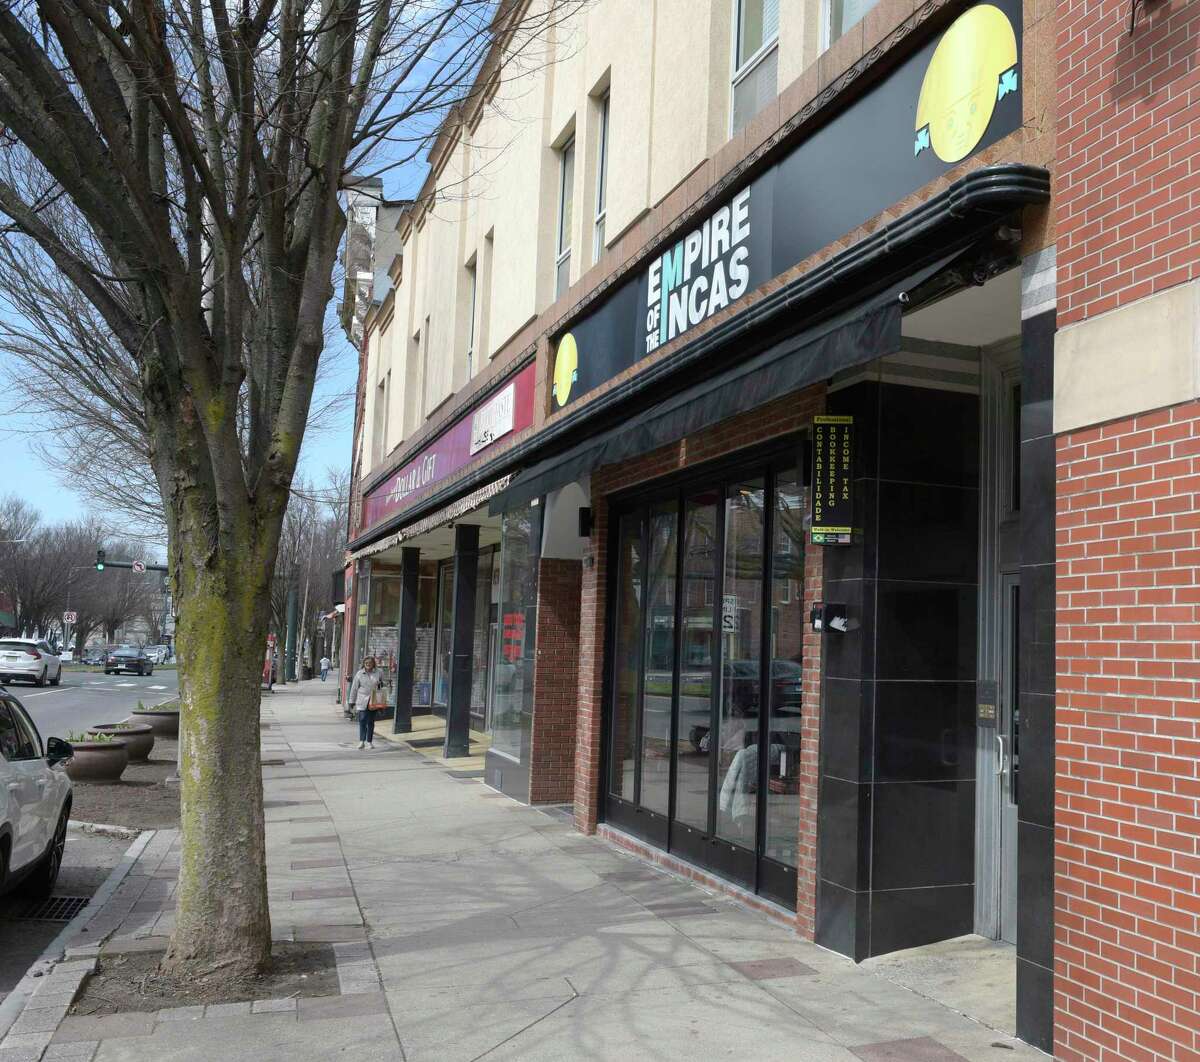 David Aliaga, owner of Empire of the Incas restaurant at 241 Main Street, is opening a new restaurant across the street called Po-Yo. Tuesday, April 5, 2022, Danbury, Conn.